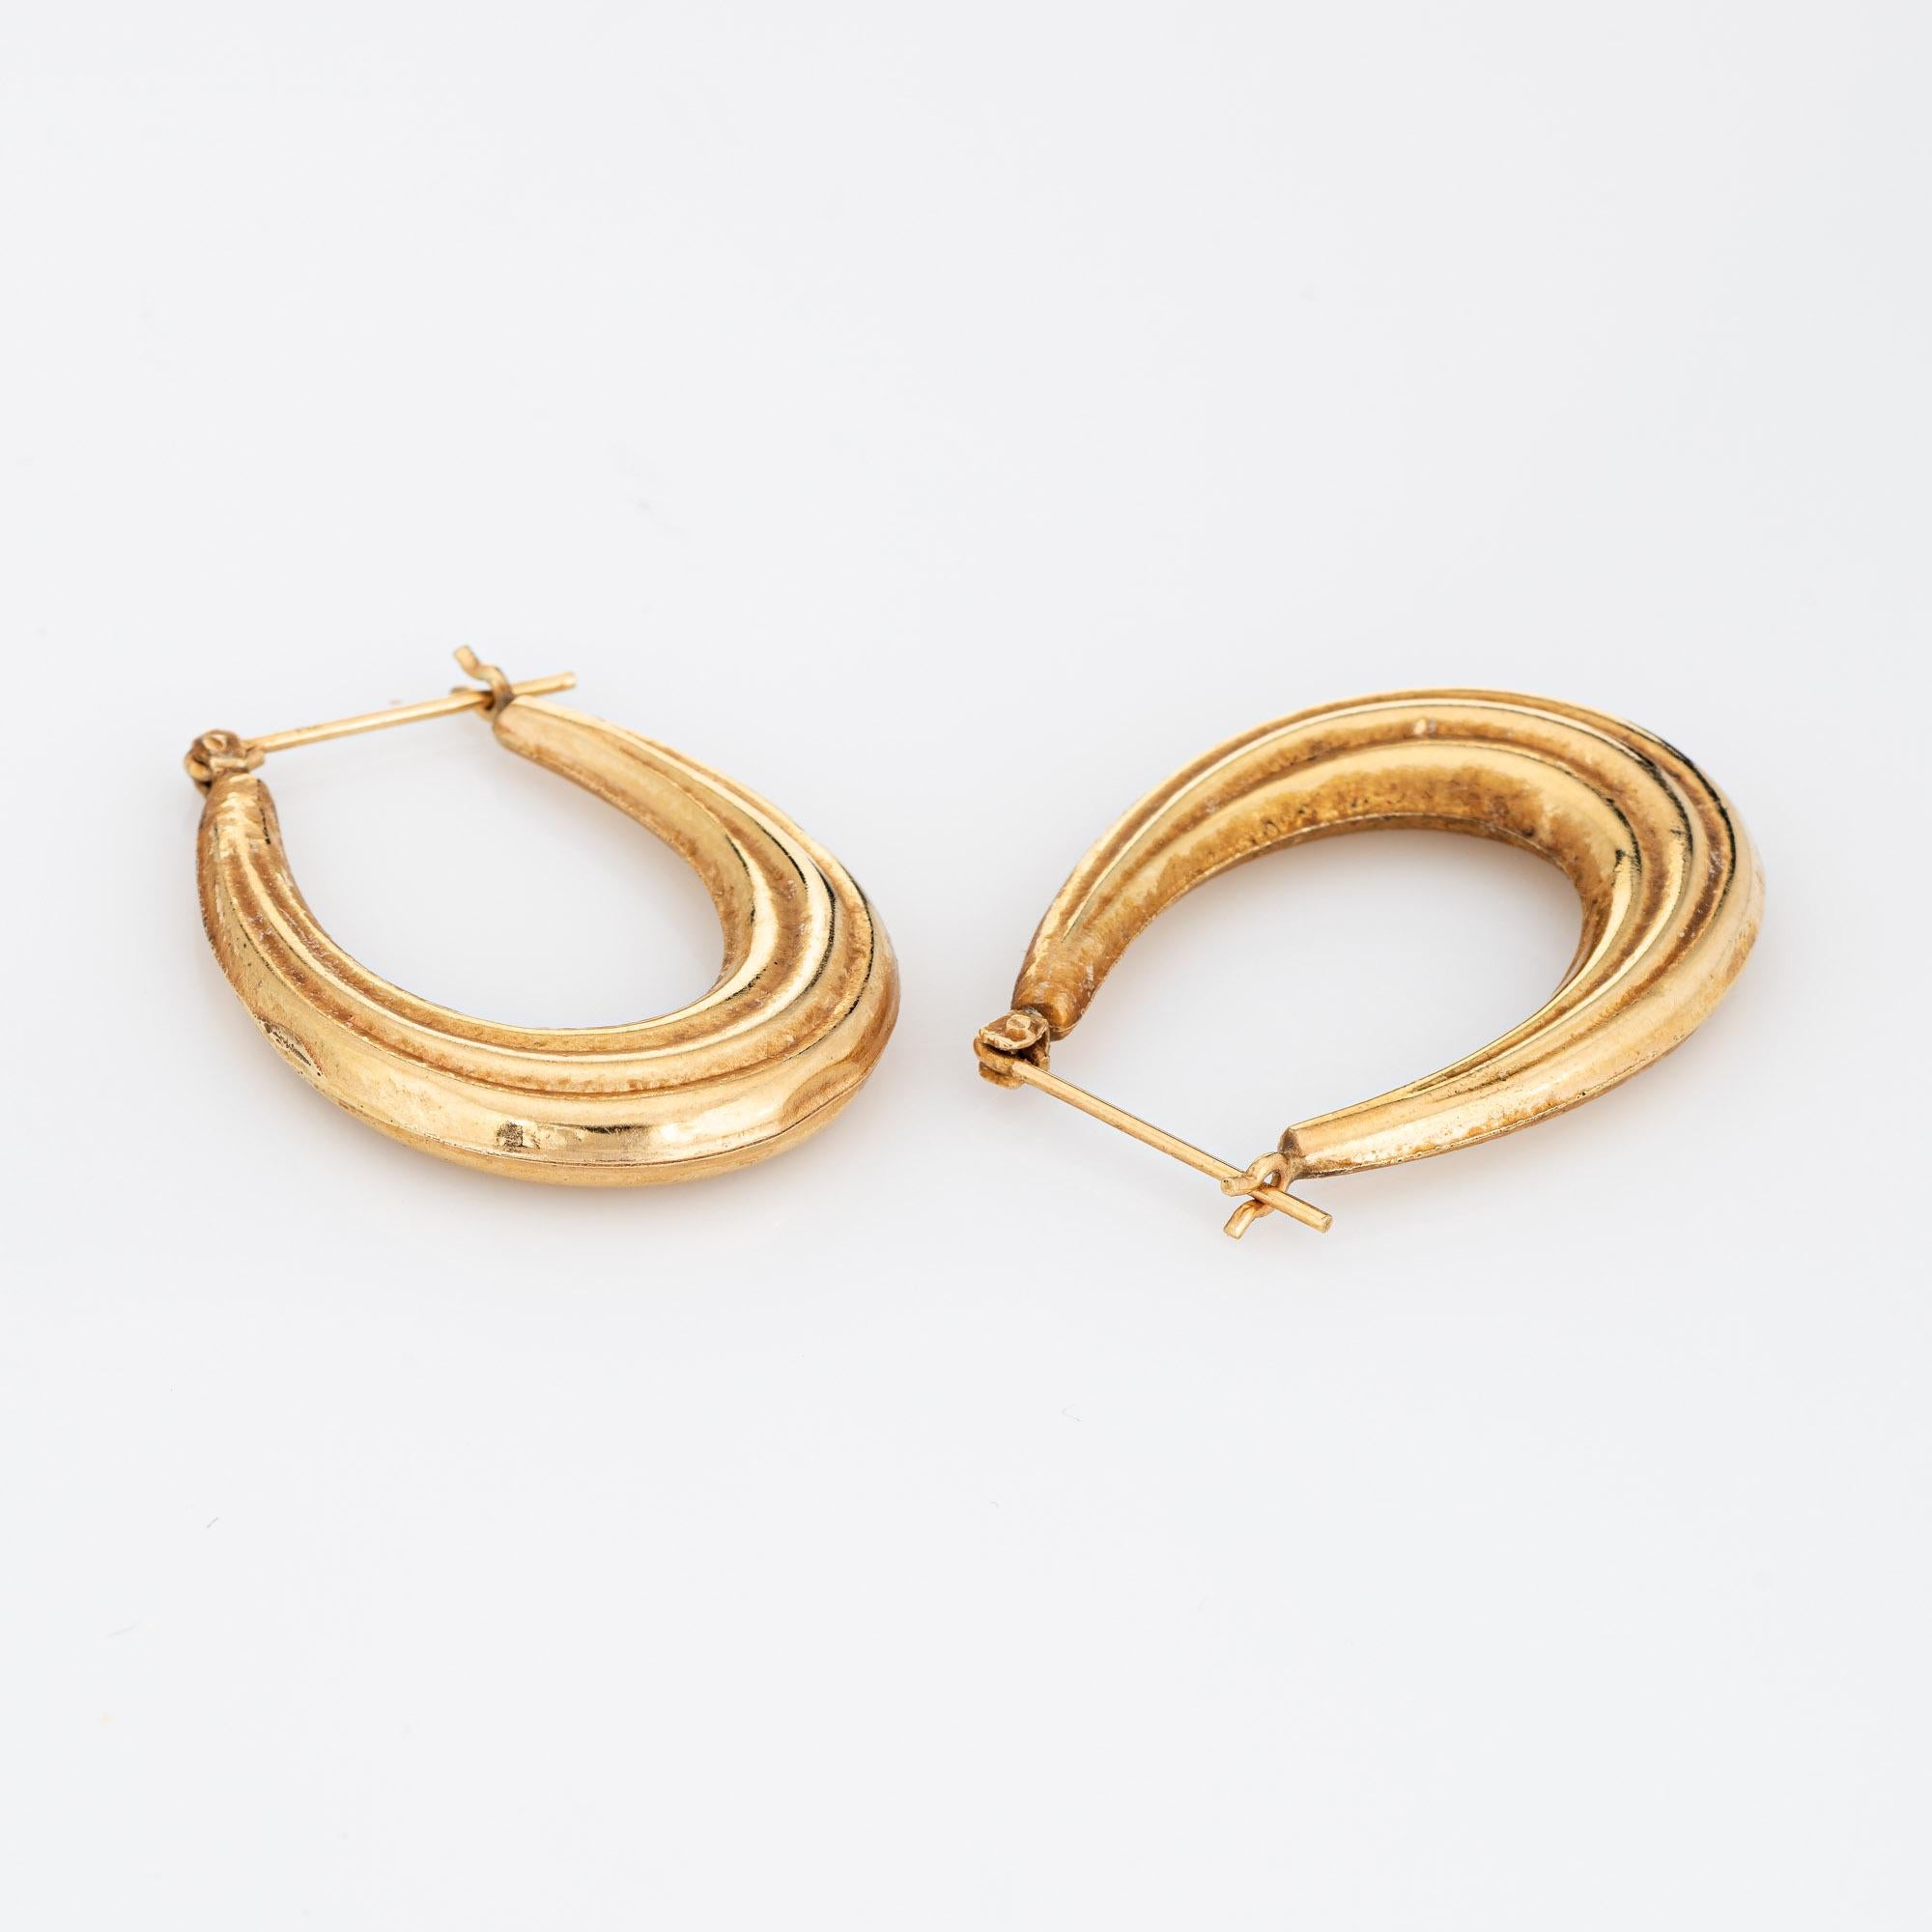 Fine detailed pair of oval hoop earrings crafted in 14k yellow gold (circa 1980s). 

The stylish earrings feature a ridged design. The hollow earrings offer a lightweight feel for a comfortable fit on the earlobe. The earrings are fitted with post